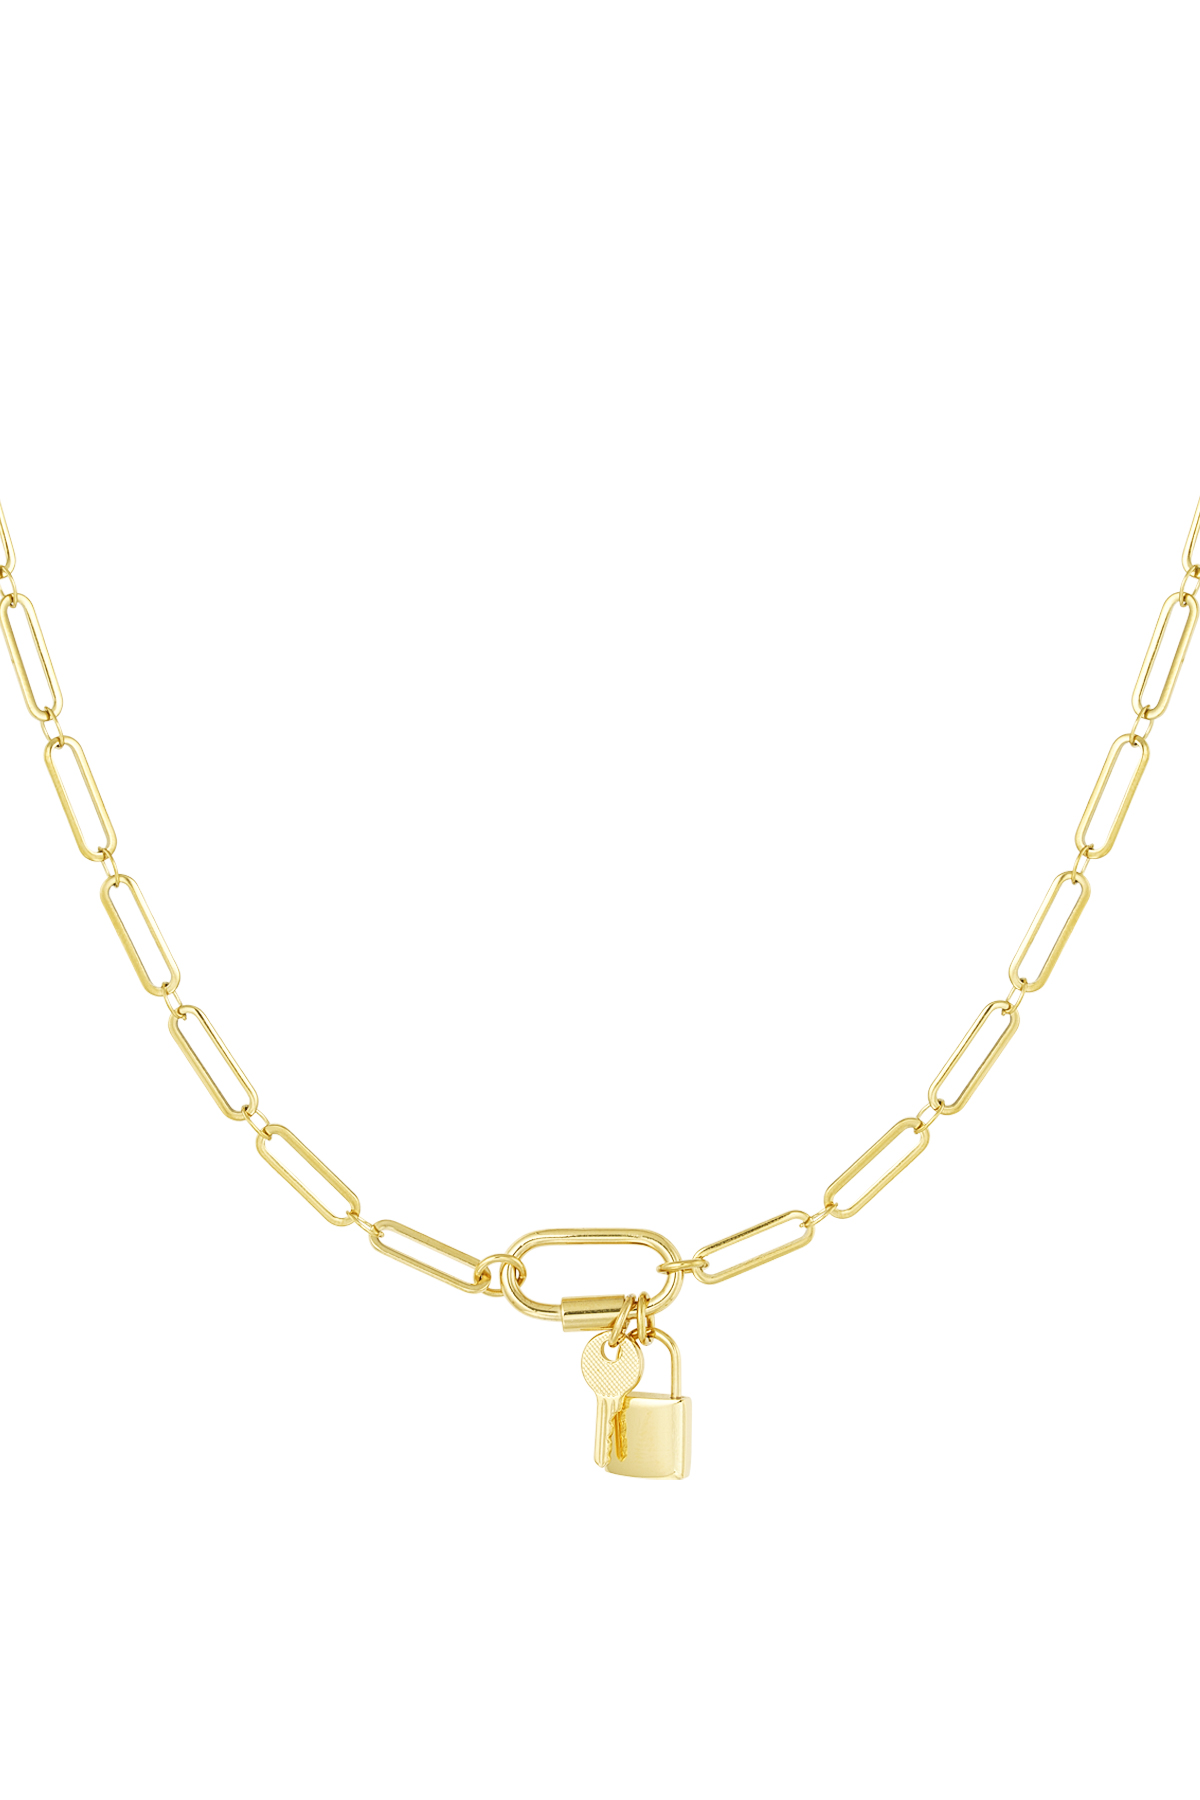 Chain links with lock and key - gold 